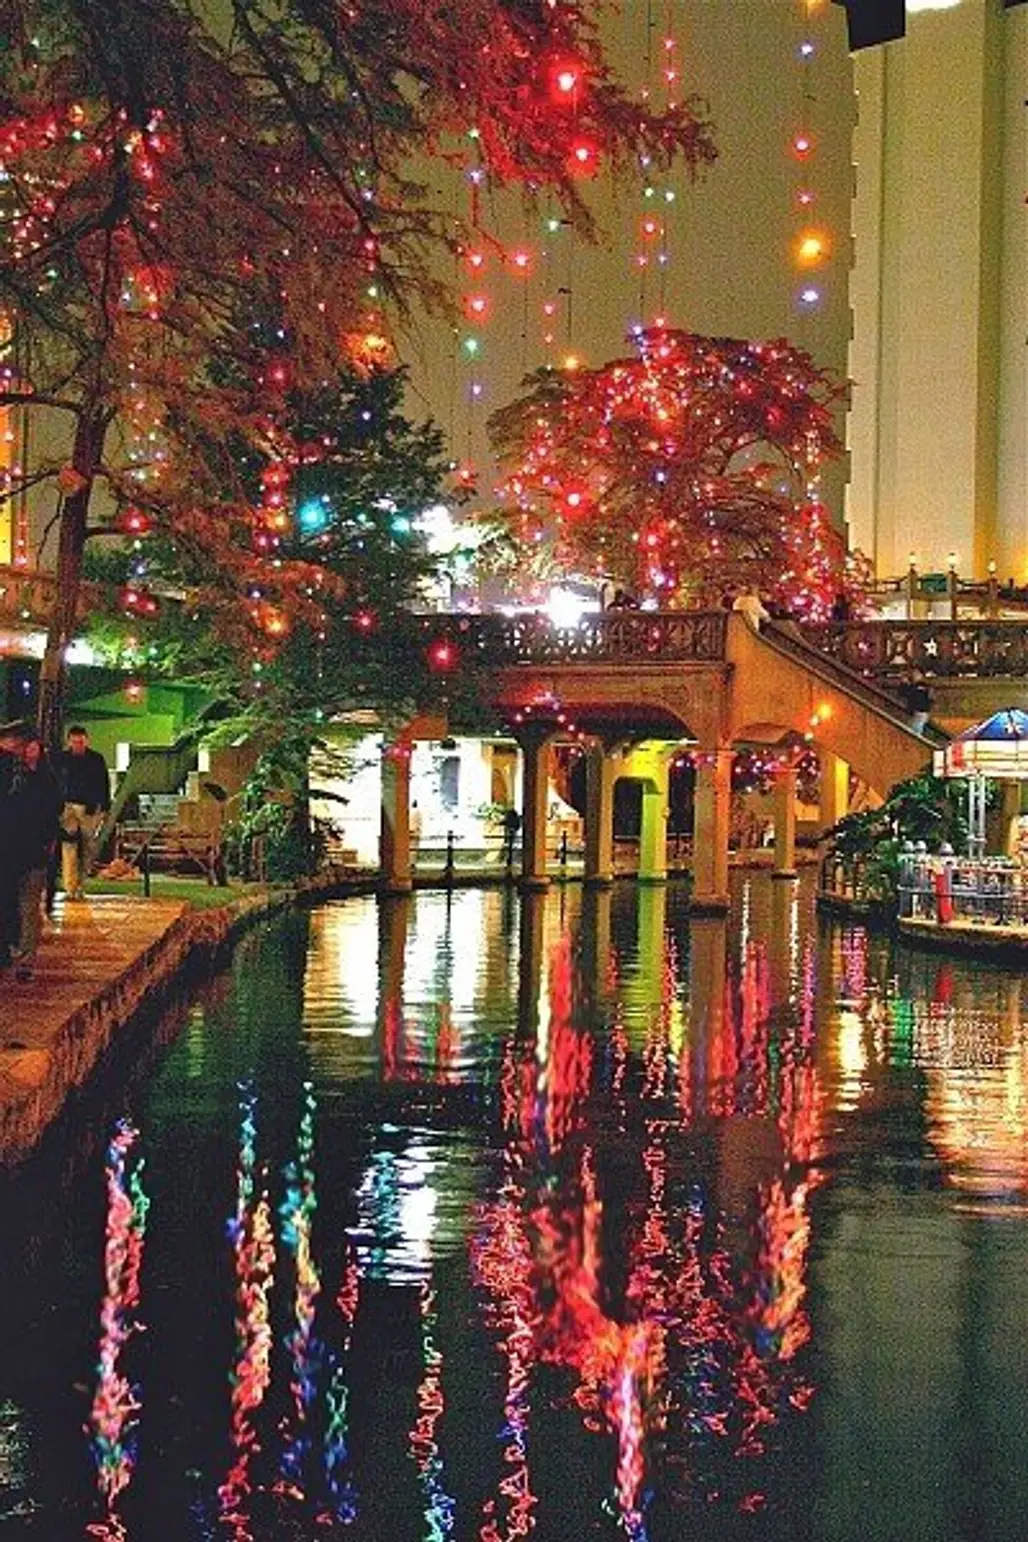 Chill out in San Antonio, Texas